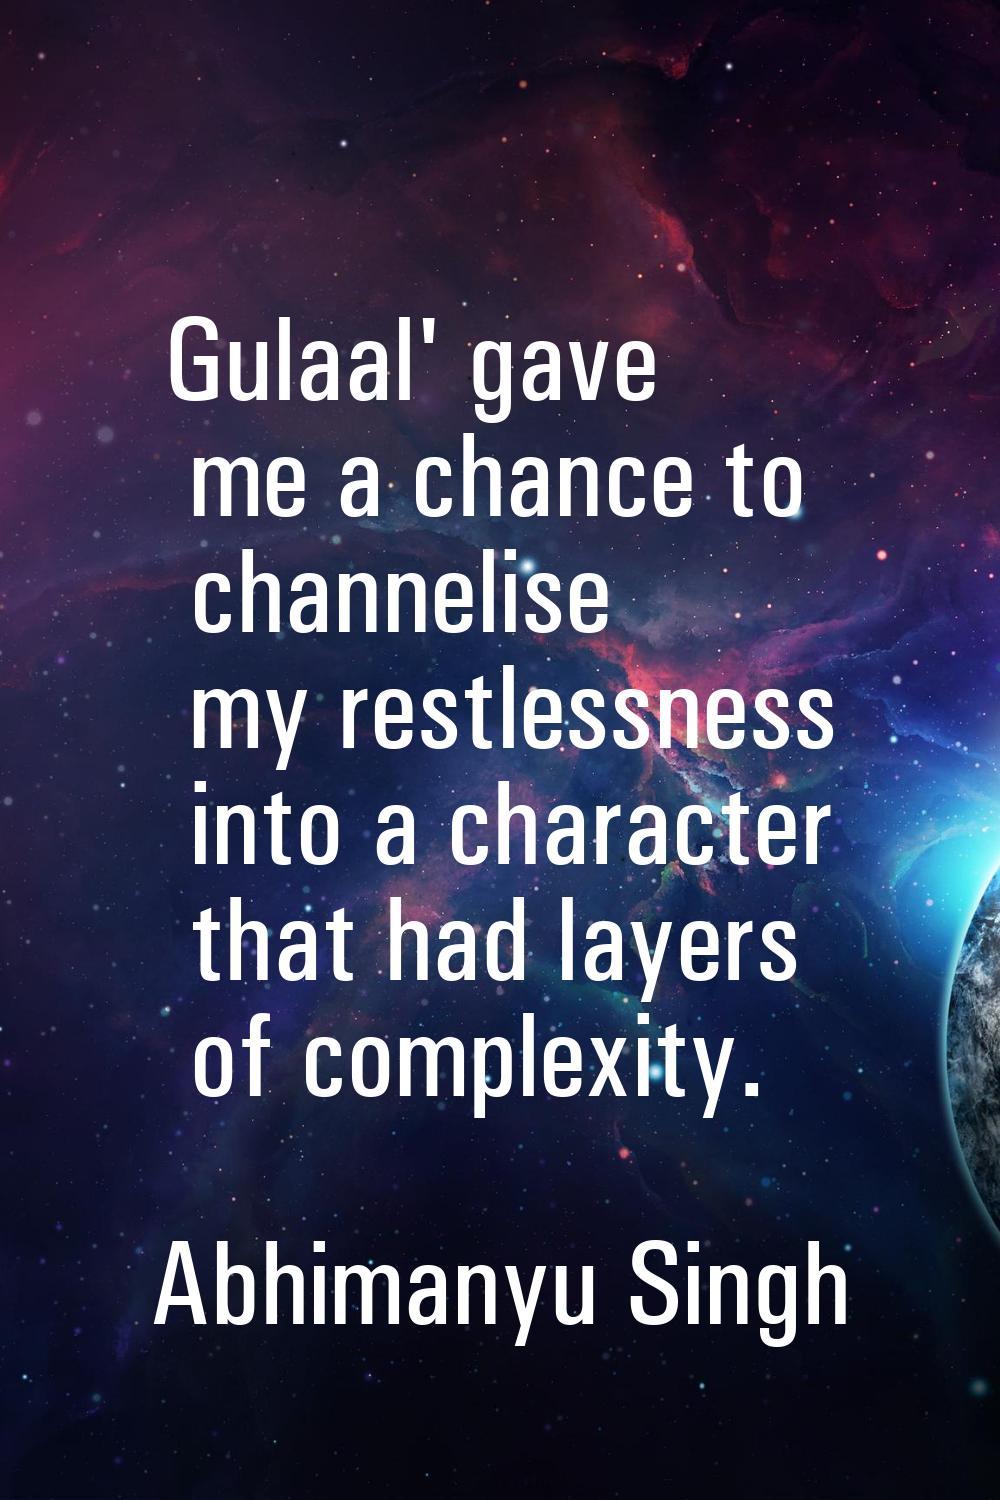 Gulaal' gave me a chance to channelise my restlessness into a character that had layers of complexi